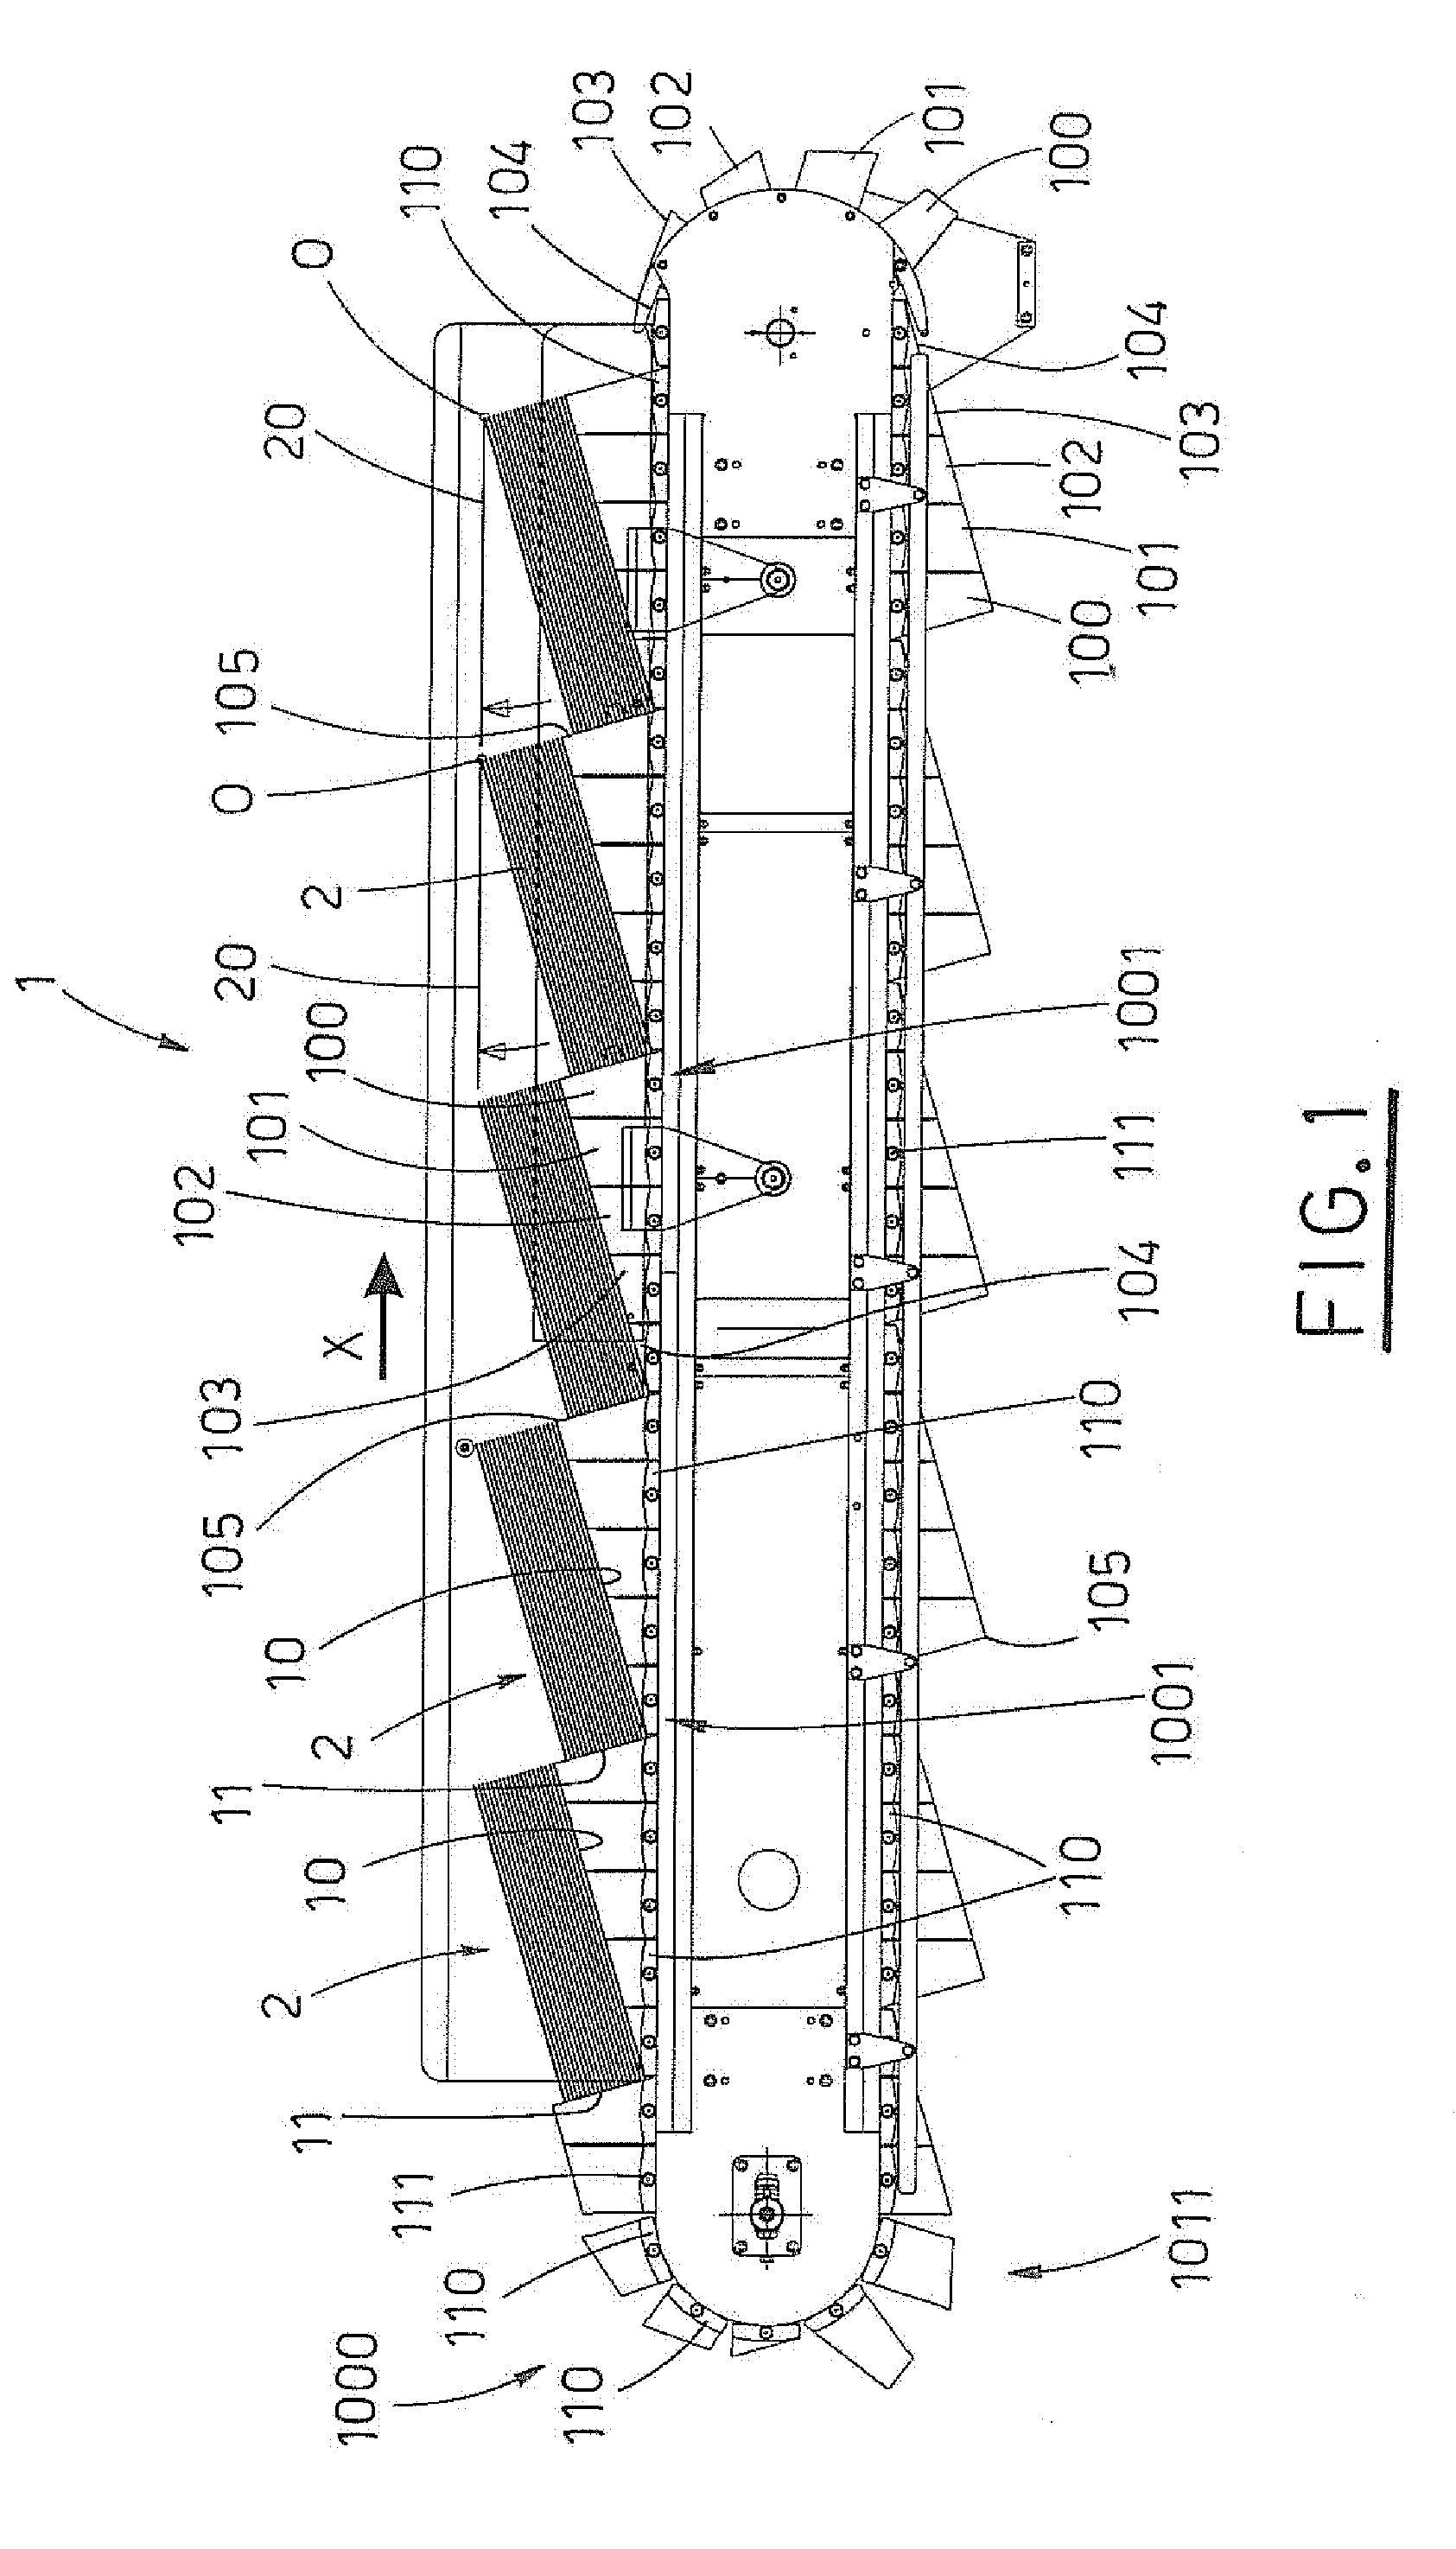 Method For Supplying Blanks To A Marking Apparatus. A Conveyor Device For Transporting Blanks And A Transfer Device For Blanks